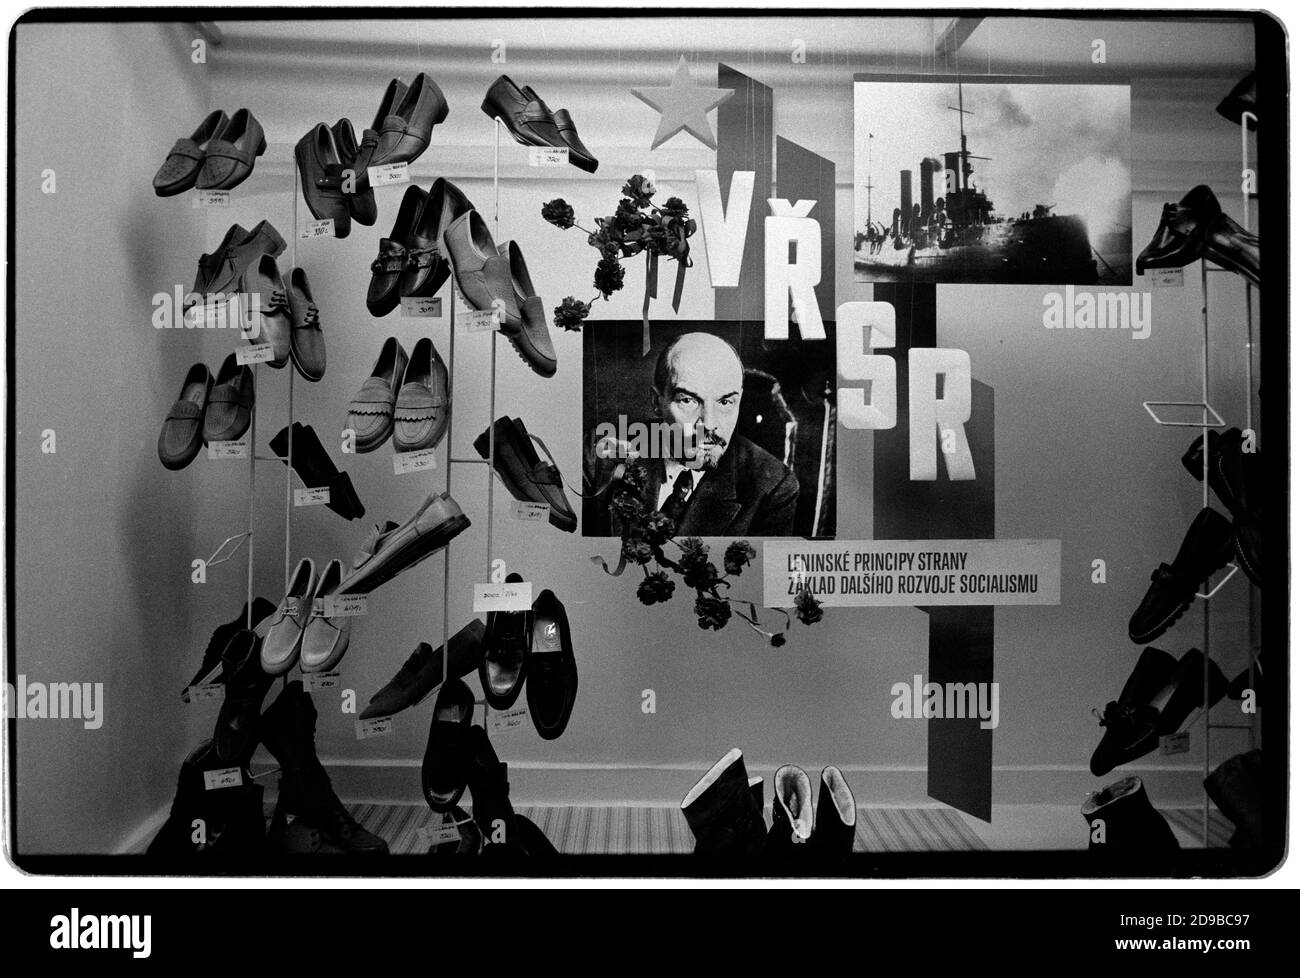 Czechoslovakia Velvet Revolution Prague November 1989 Scanned in 2020 Bata  shoe shop with Lenin and the Aurora in shop window with shoes in Prague  Wikipedia: The Velvet Revolution (Czech: sametová revoluce) or